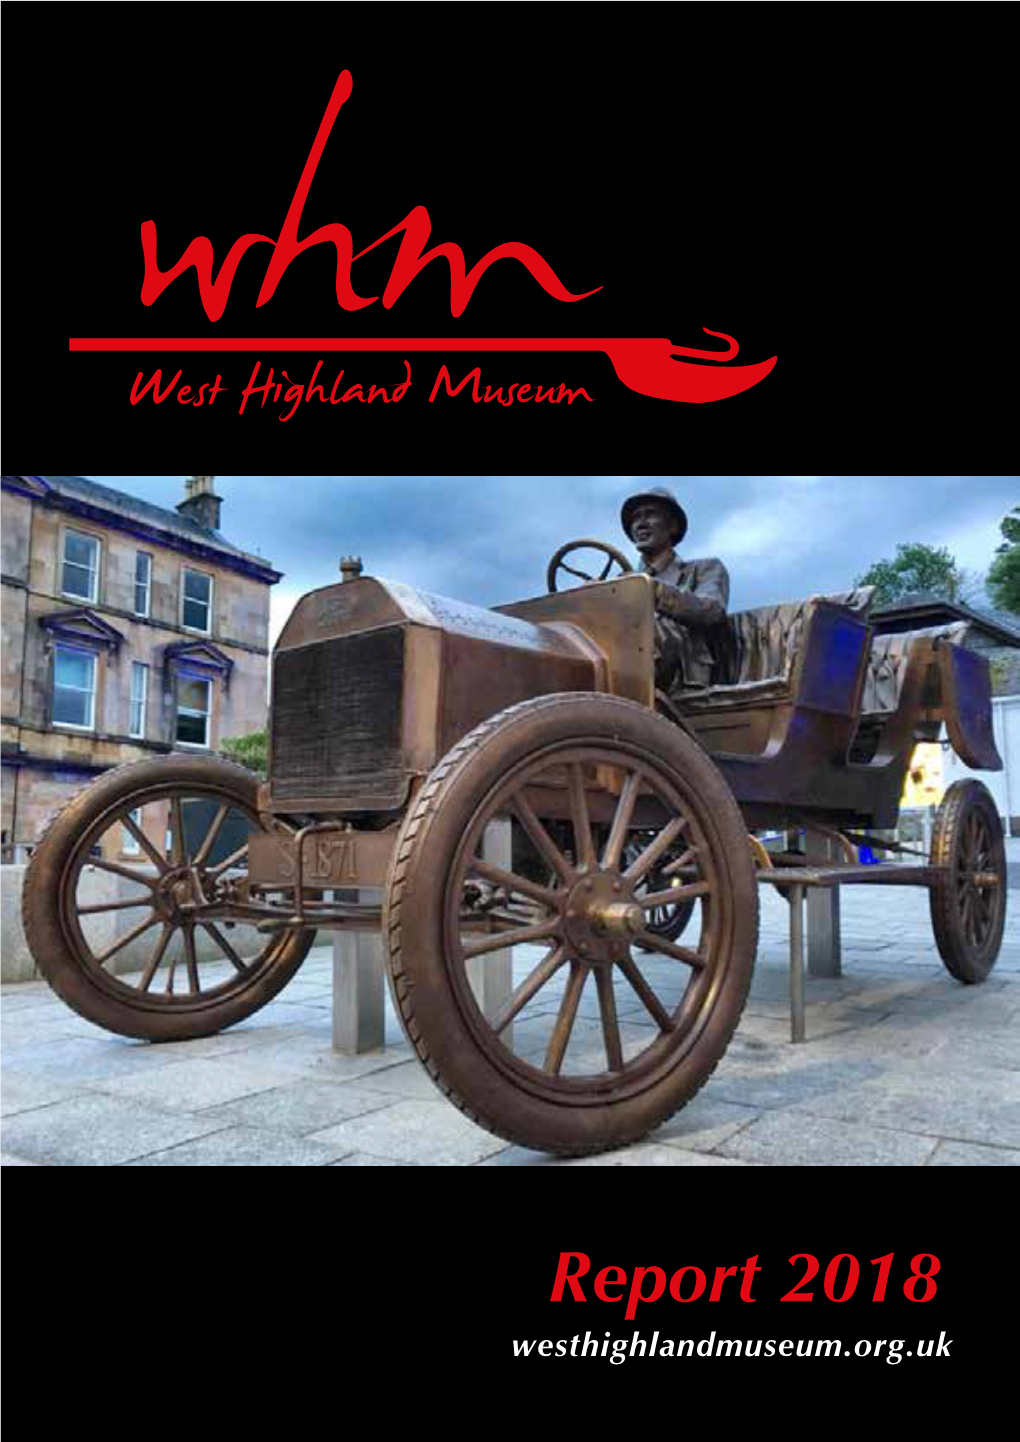 Report 2018 Westhighlandmuseum.Org.Uk the West Highland Museum CAMERON SQUARE, FORT WILLIAM PRESIDENT Donald Angus Cameron of Lochiel DIRECTORS Vice-President – Mrs F